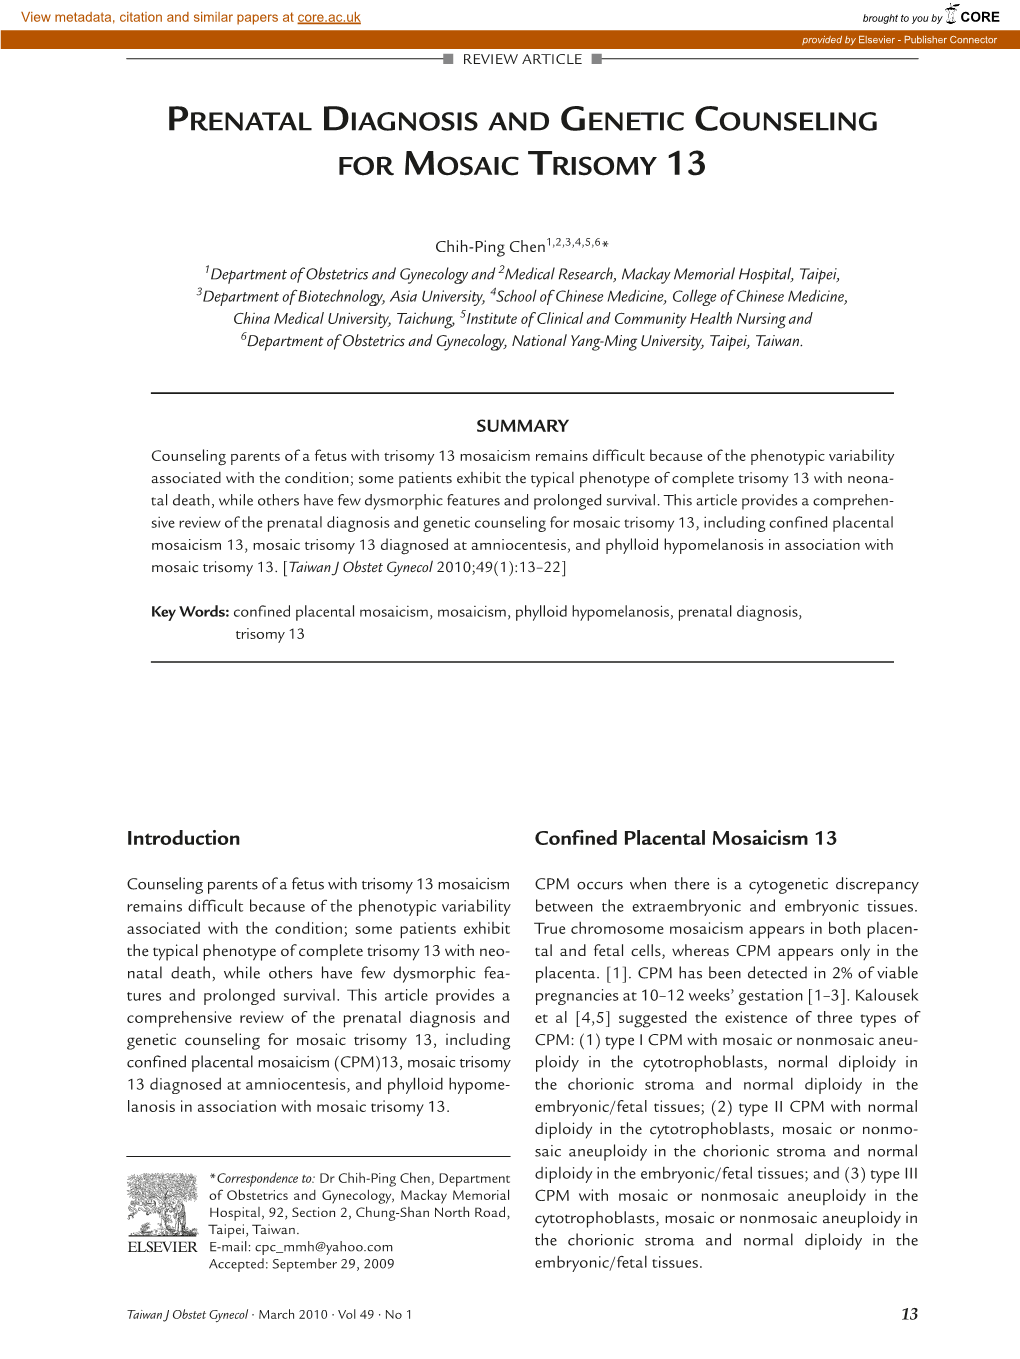 Prenatal Diagnosis and Genetic Counseling for Mosaic Trisomy 13